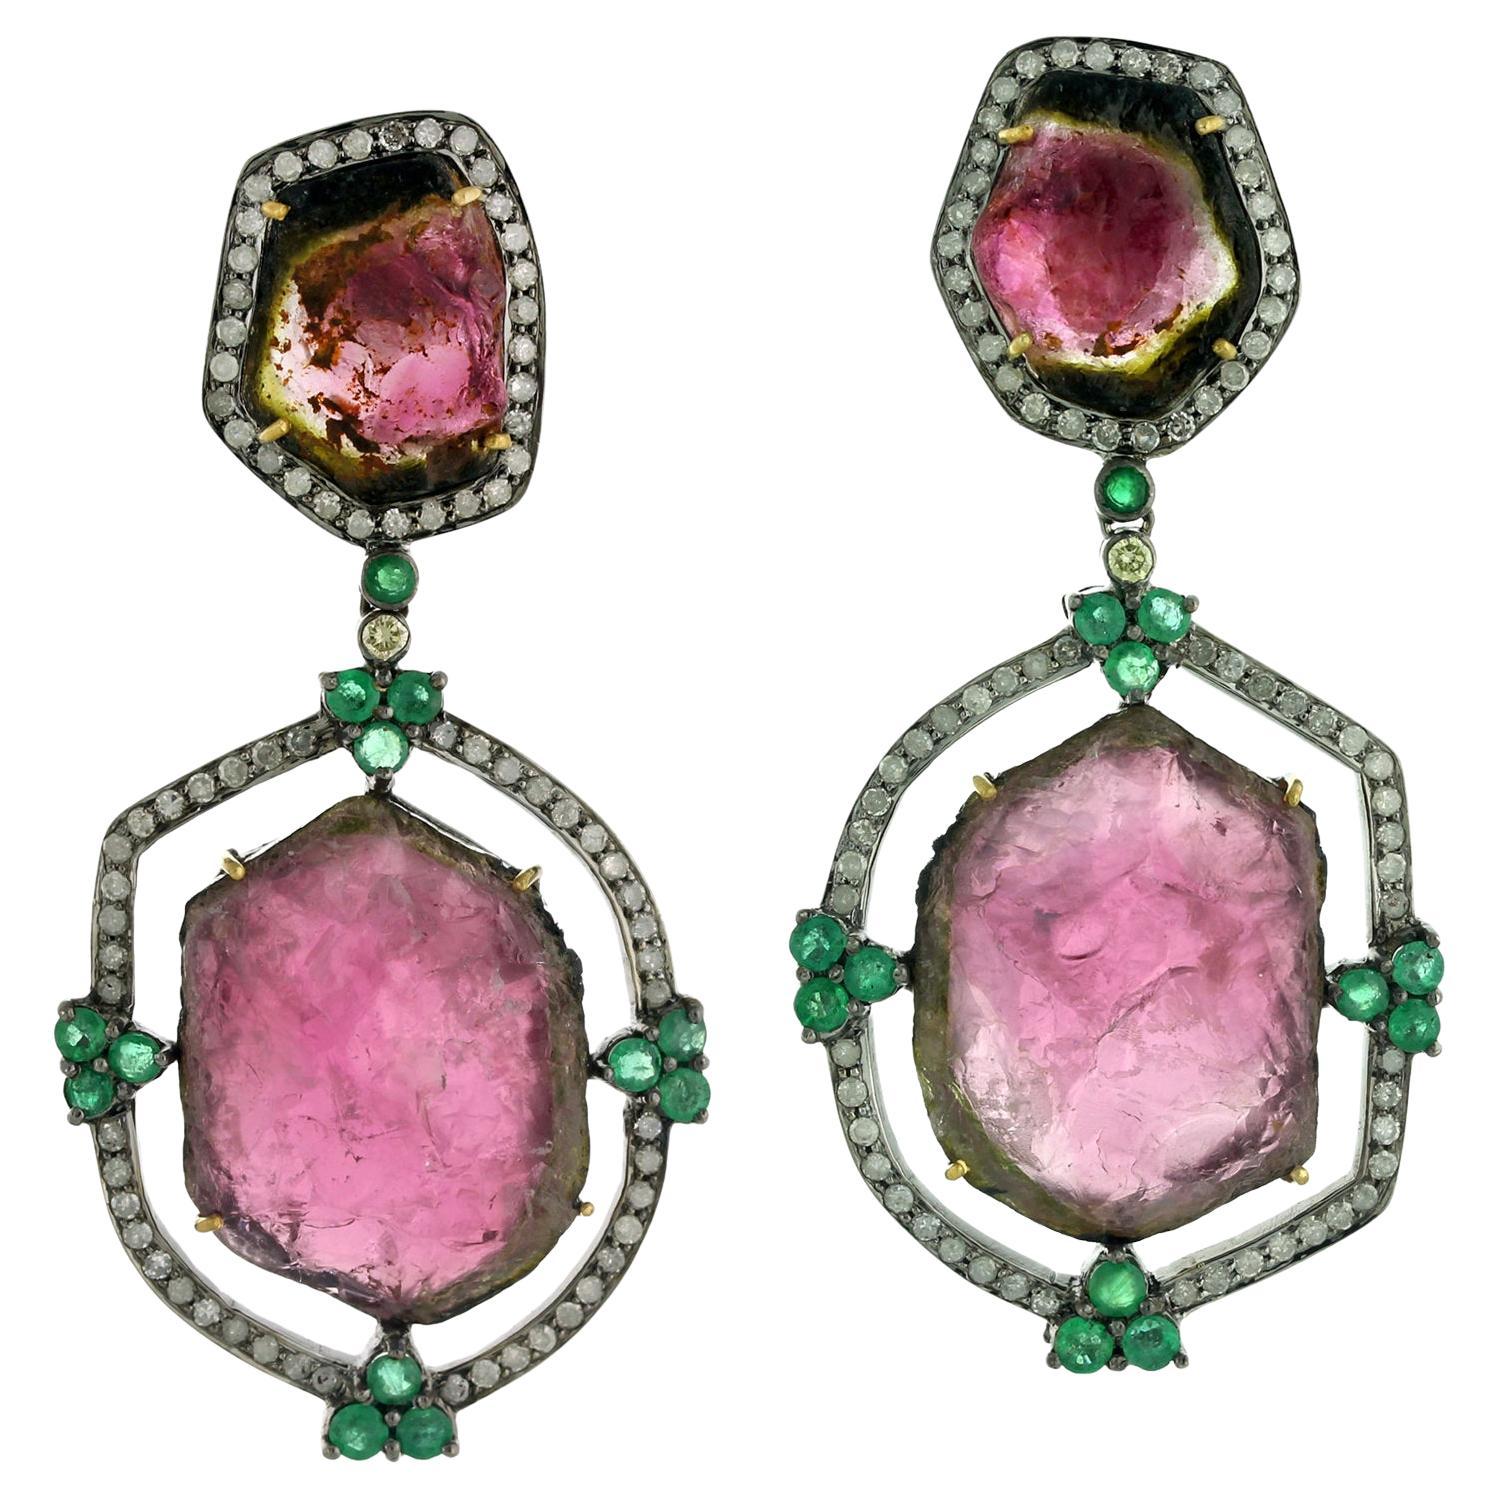 Sliced Geode & Multigemstone Earring With Pave Diamonds In 18k Gold & Silver